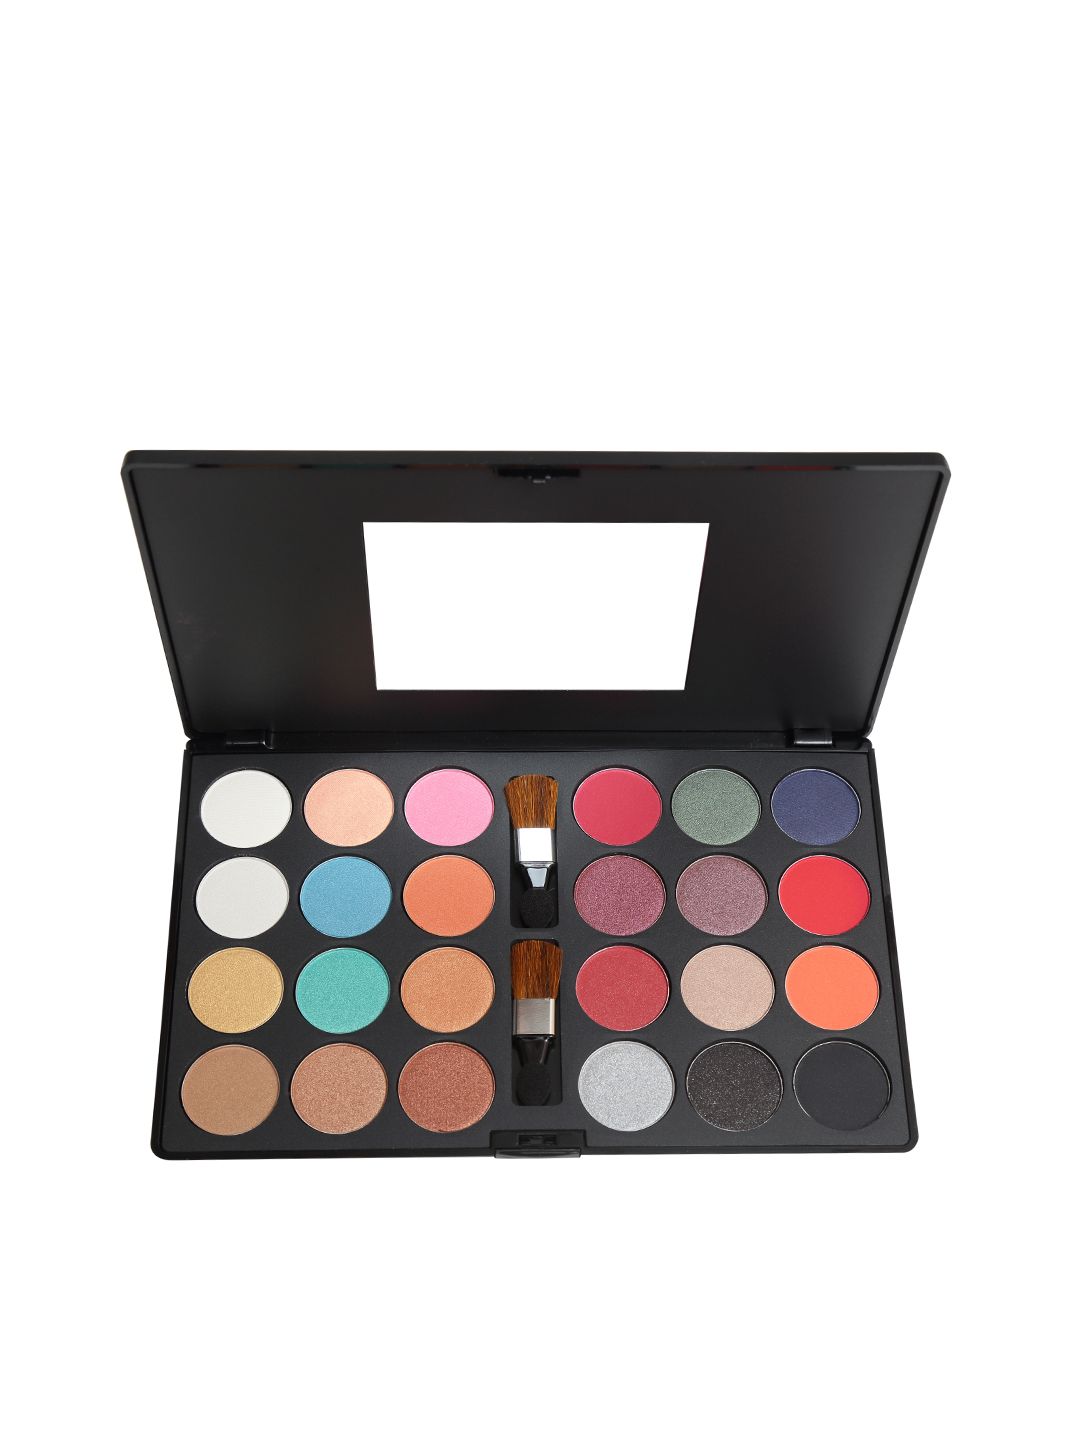 Miss Claire 1 Professional Eyeshadow Palette 48 g Price in India